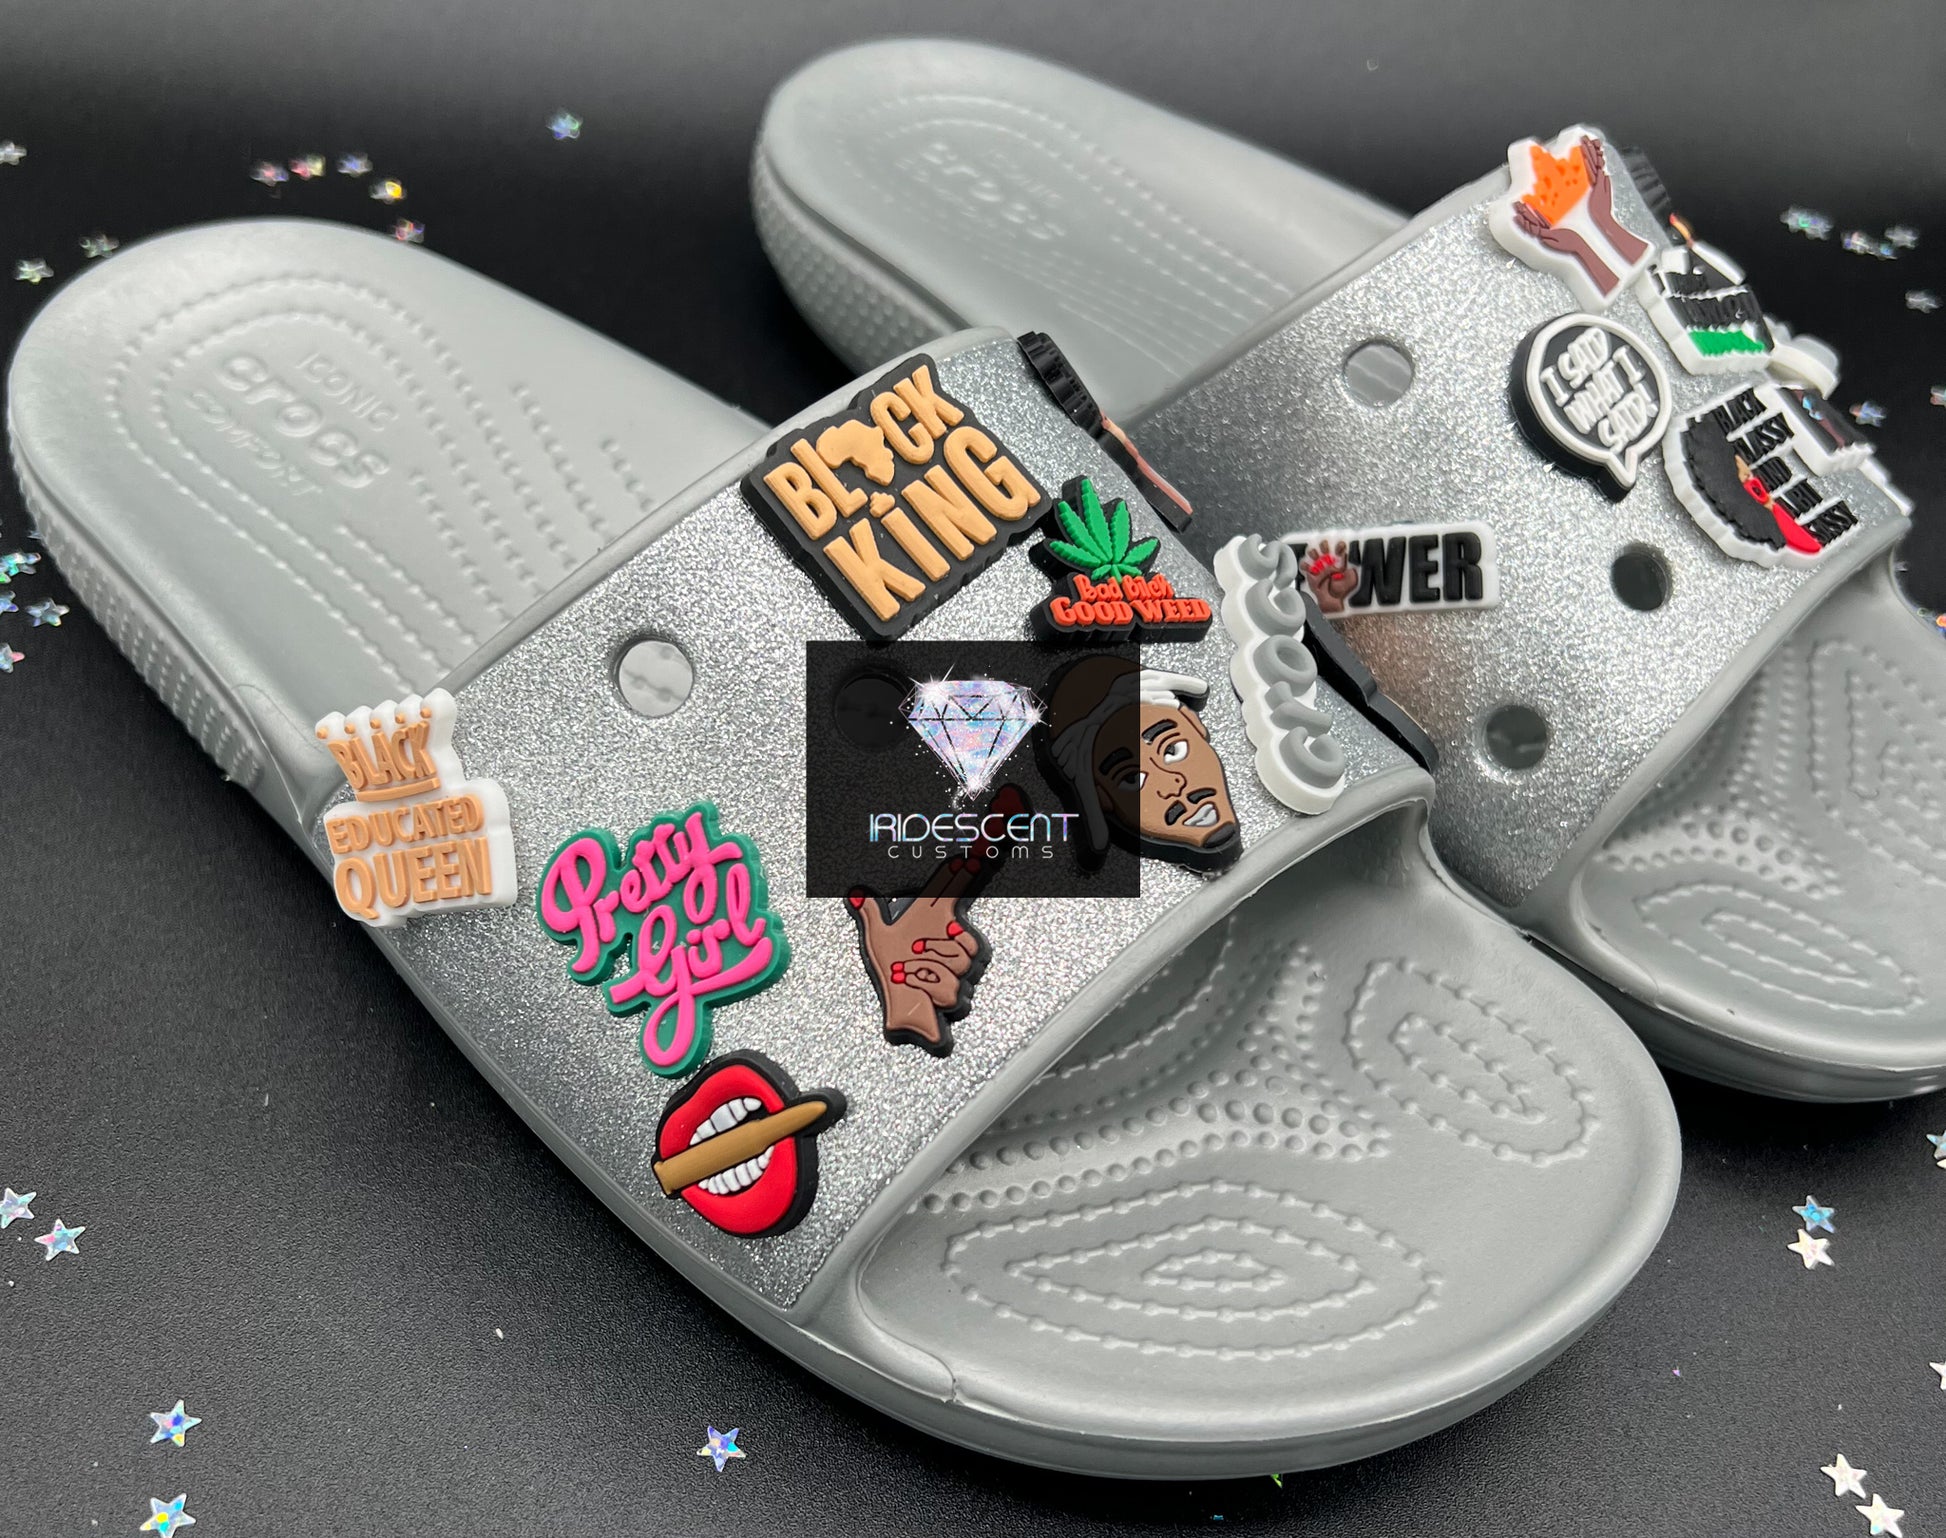 Customize Blinged Out Crocs and Slides